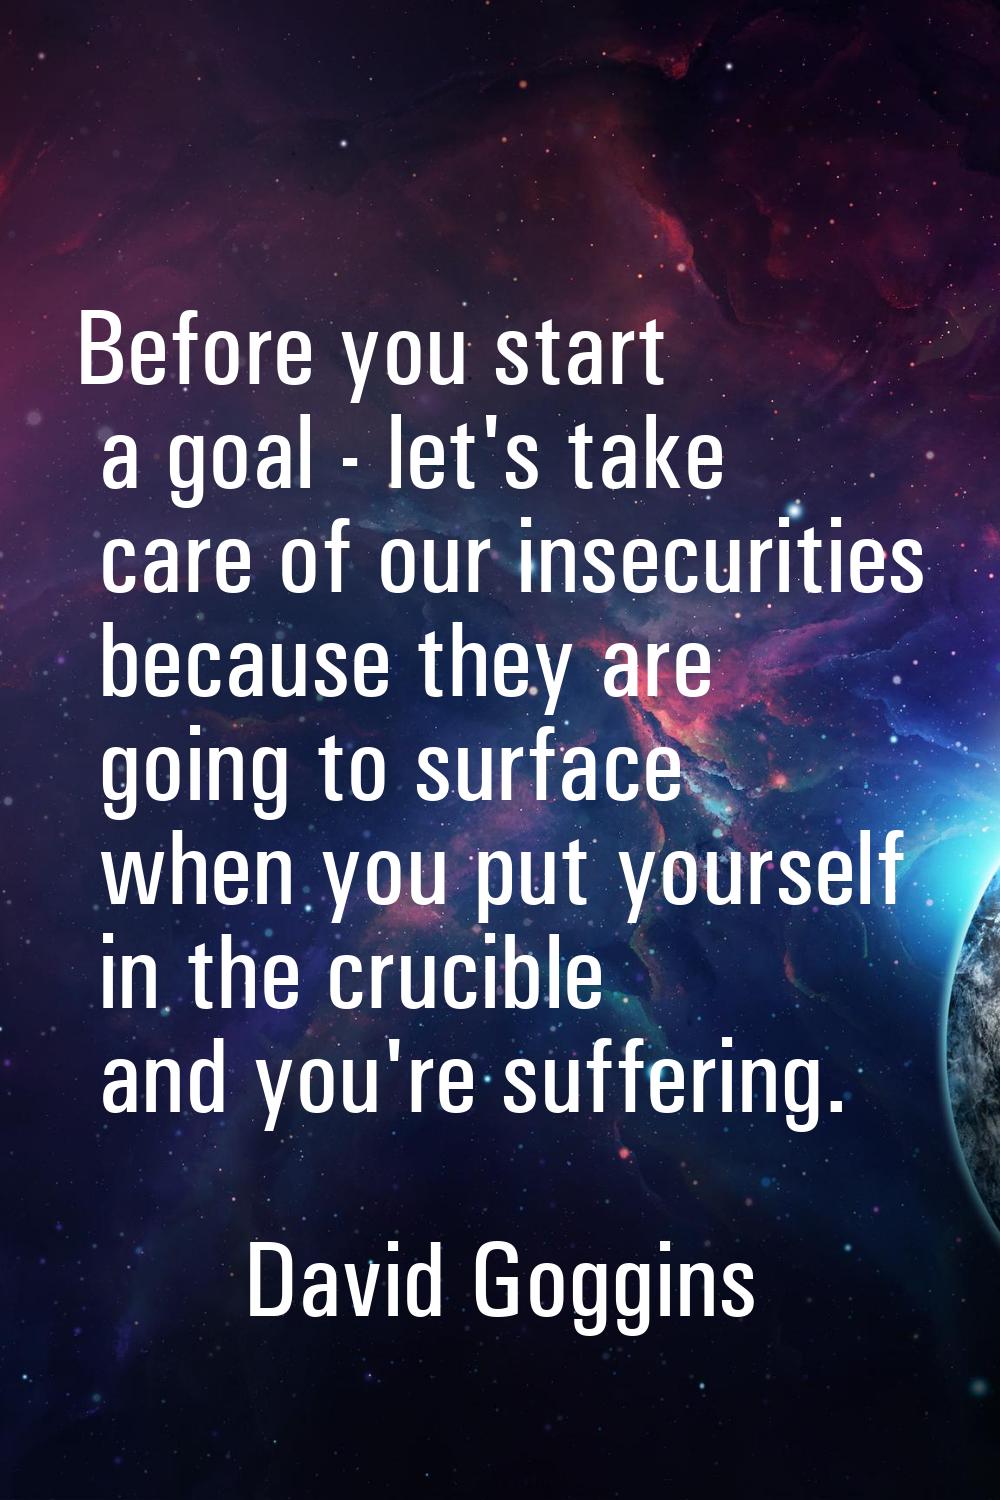 Before you start a goal - let's take care of our insecurities because they are going to surface whe